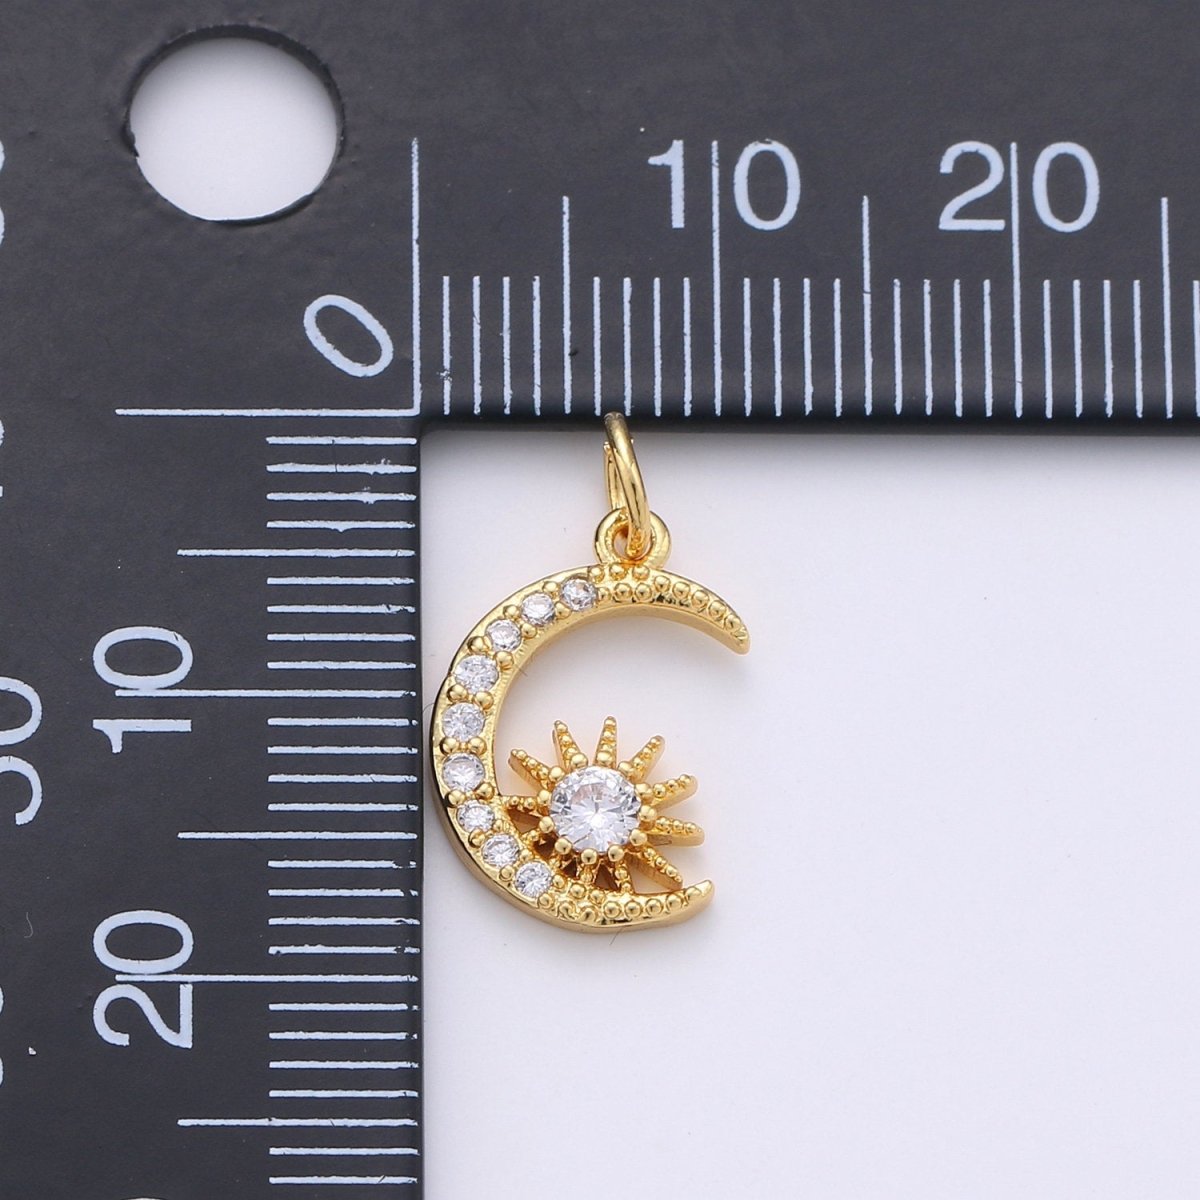 24k Gold Filled Micro Pave Moon Charm, Cubic Star Moon Pendant Charm, Gold Filled Charm, For DIY Necklace Bracelet Earring D-236 - DLUXCA